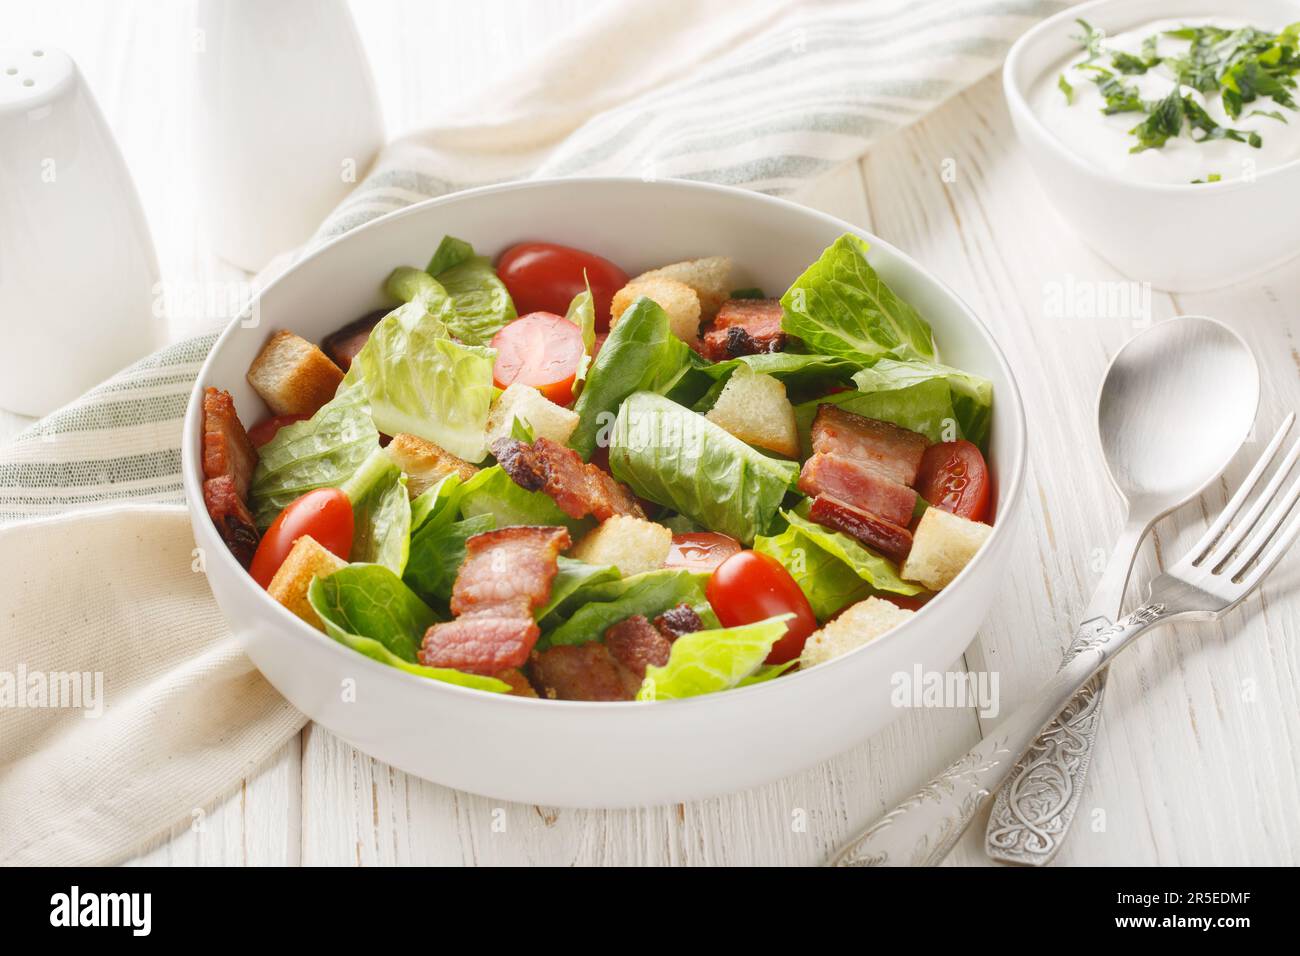 BLT Salad has a homemade ranch dressing, crispy bacon, croutons, lettuce and tomato closeup on the plate on the table. Horizontal Stock Photo